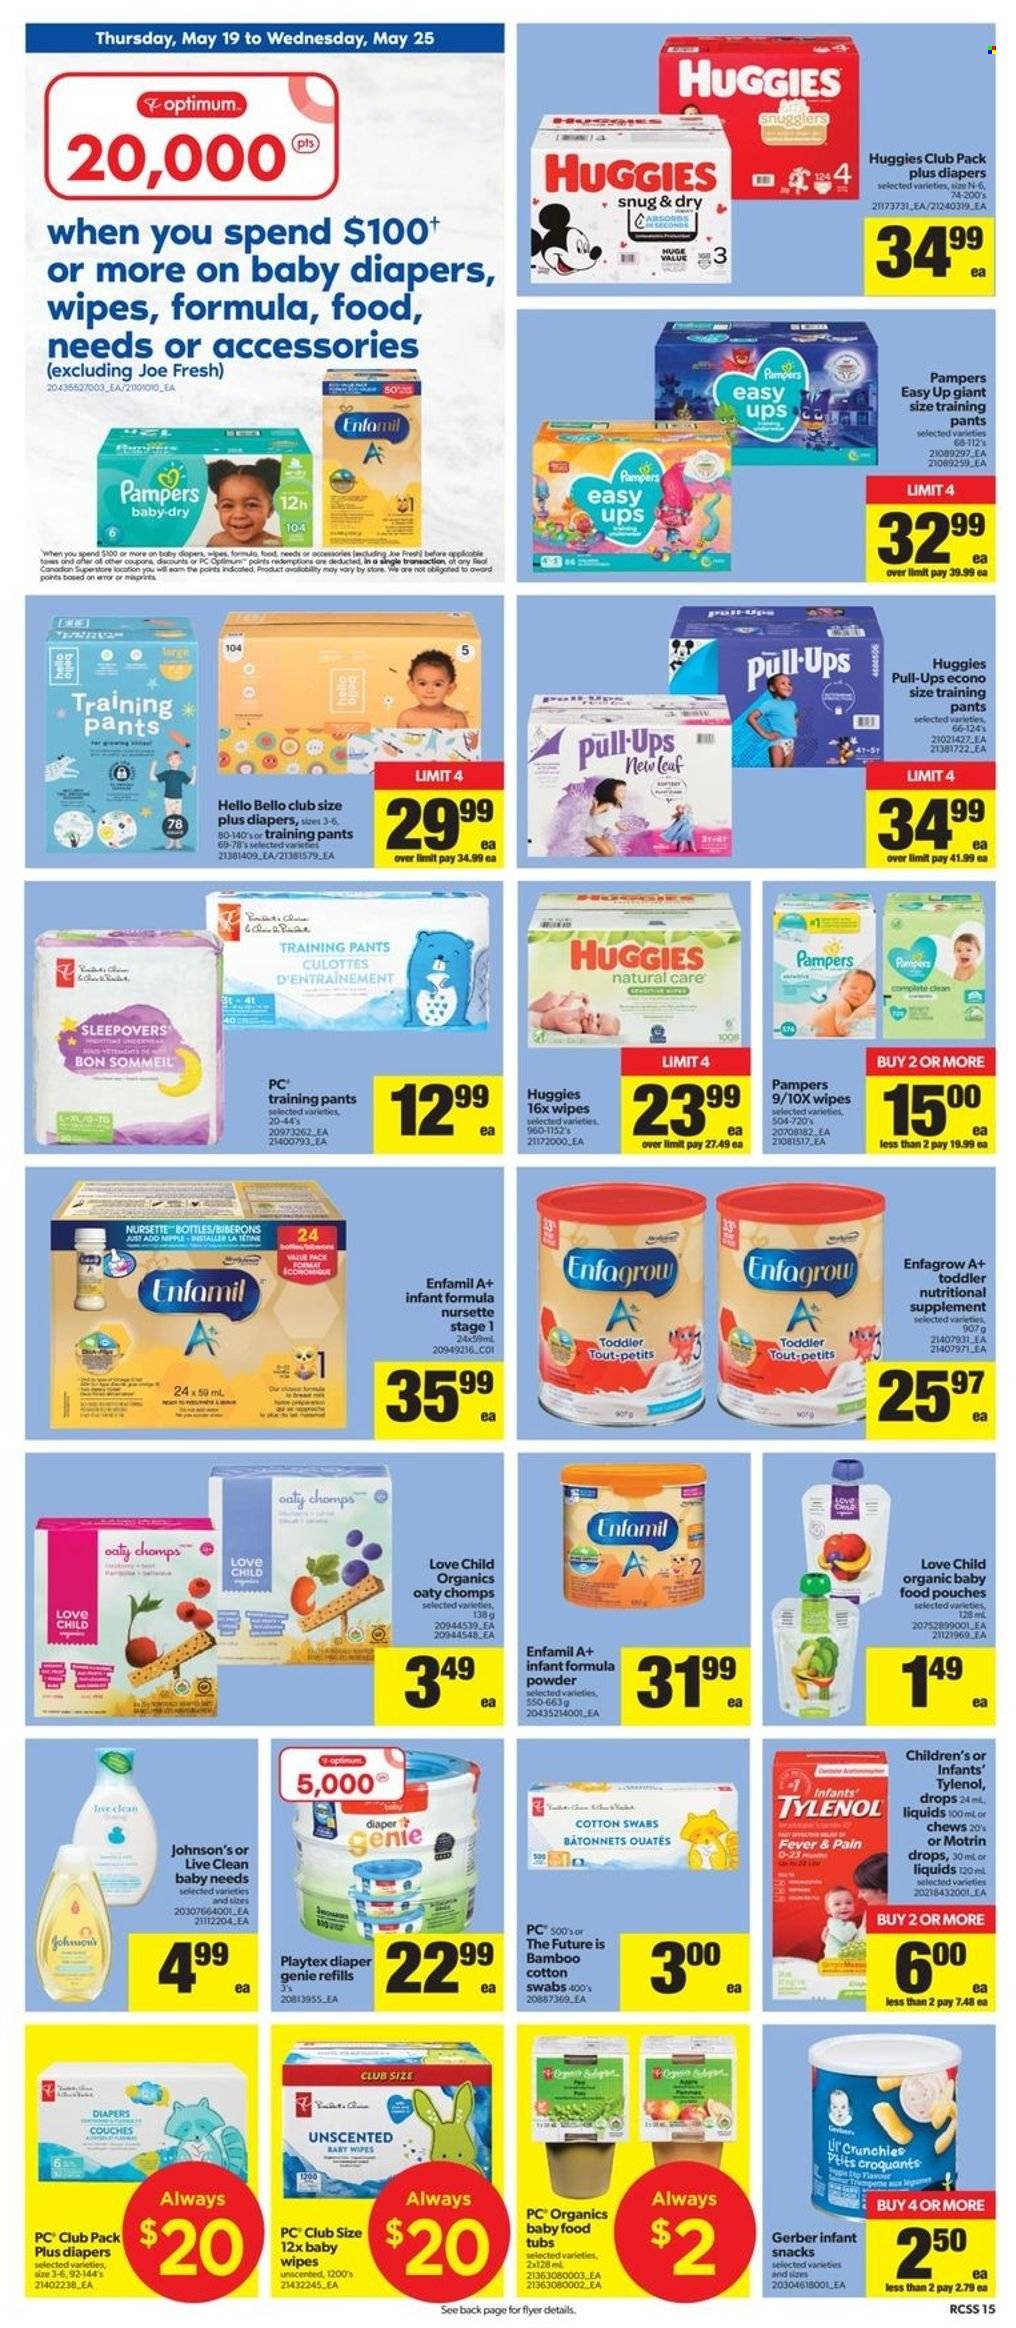 thumbnail - Real Canadian Superstore Flyer - May 19, 2022 - May 25, 2022 - Sales products - snack, chewing gum, Gerber, Enfamil, organic baby food, wipes, pants, baby wipes, nappies, Johnson's, baby pants, Playtex, Optimum, Tylenol, Motrin, Huggies, Pampers. Page 15.